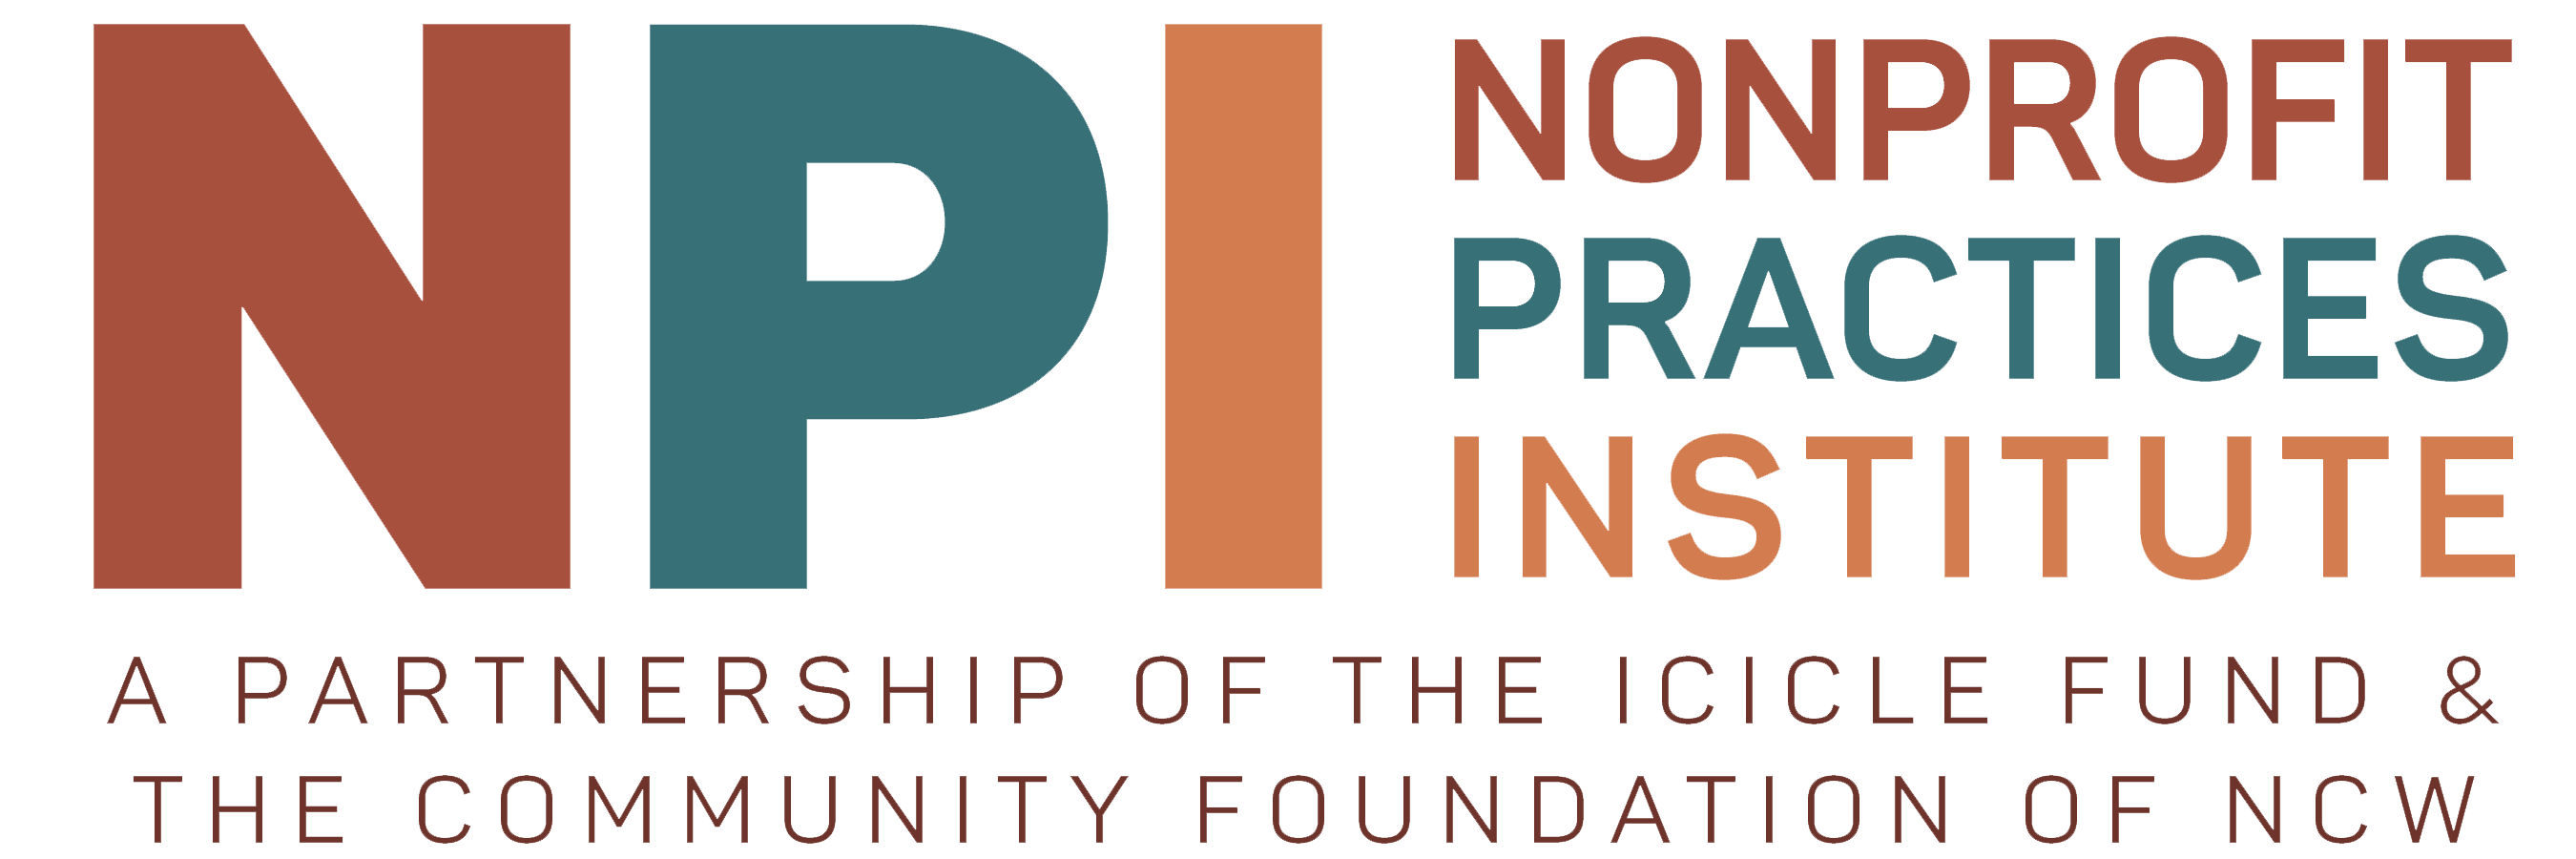 Nonprofit Practices Institute, a partnership of the Icicle Fund and the Community Foundation of NCW